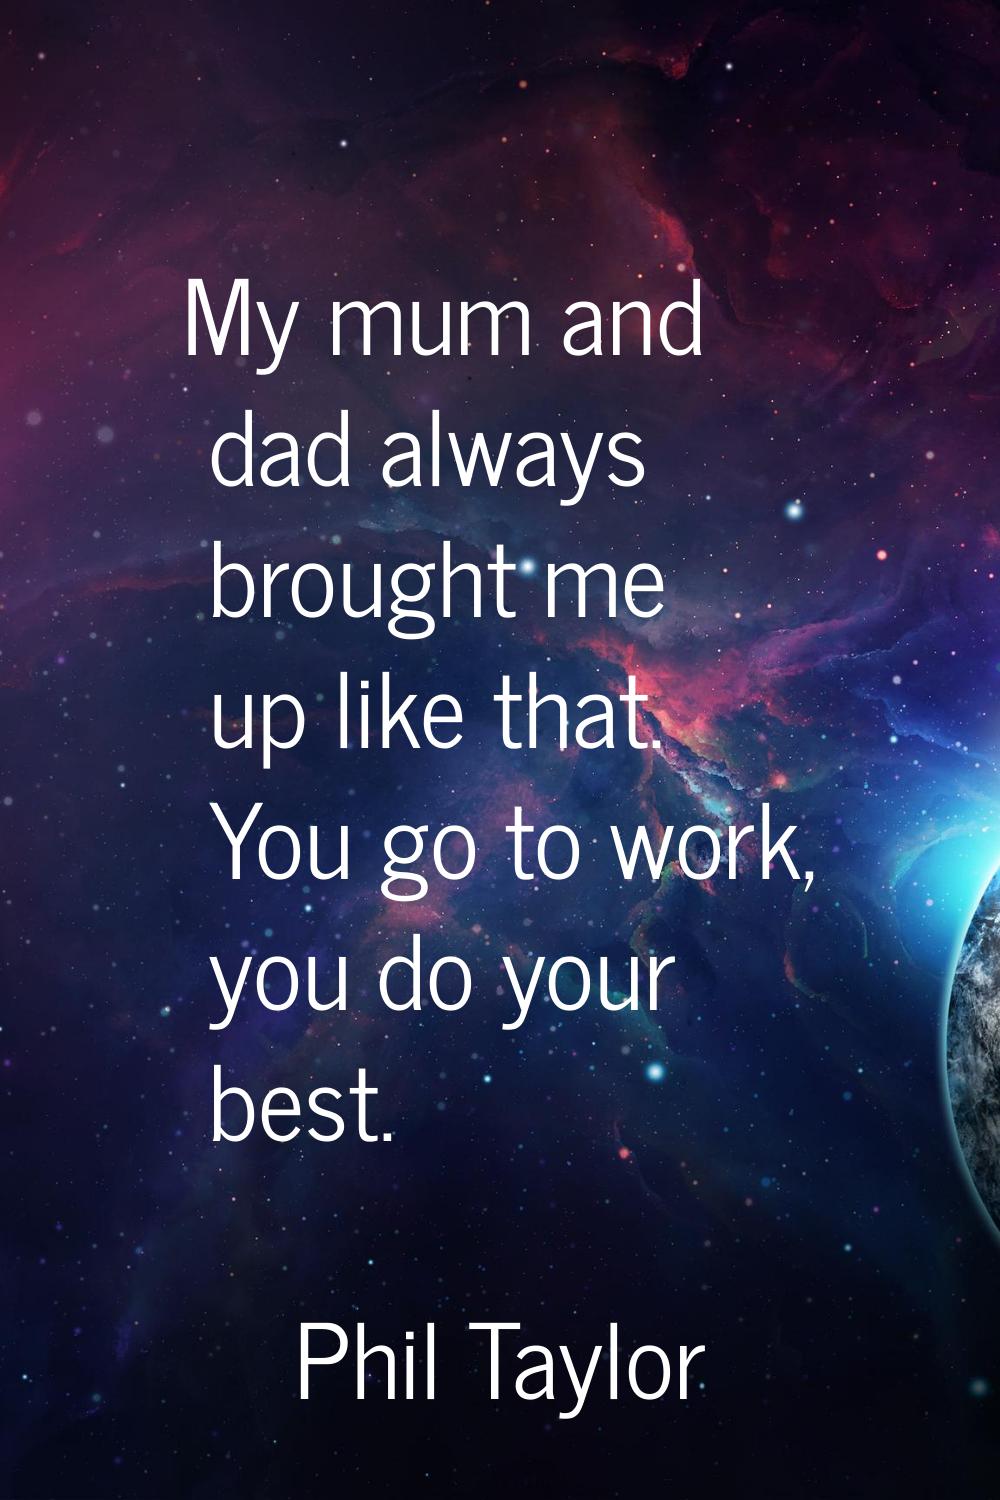 My mum and dad always brought me up like that. You go to work, you do your best.